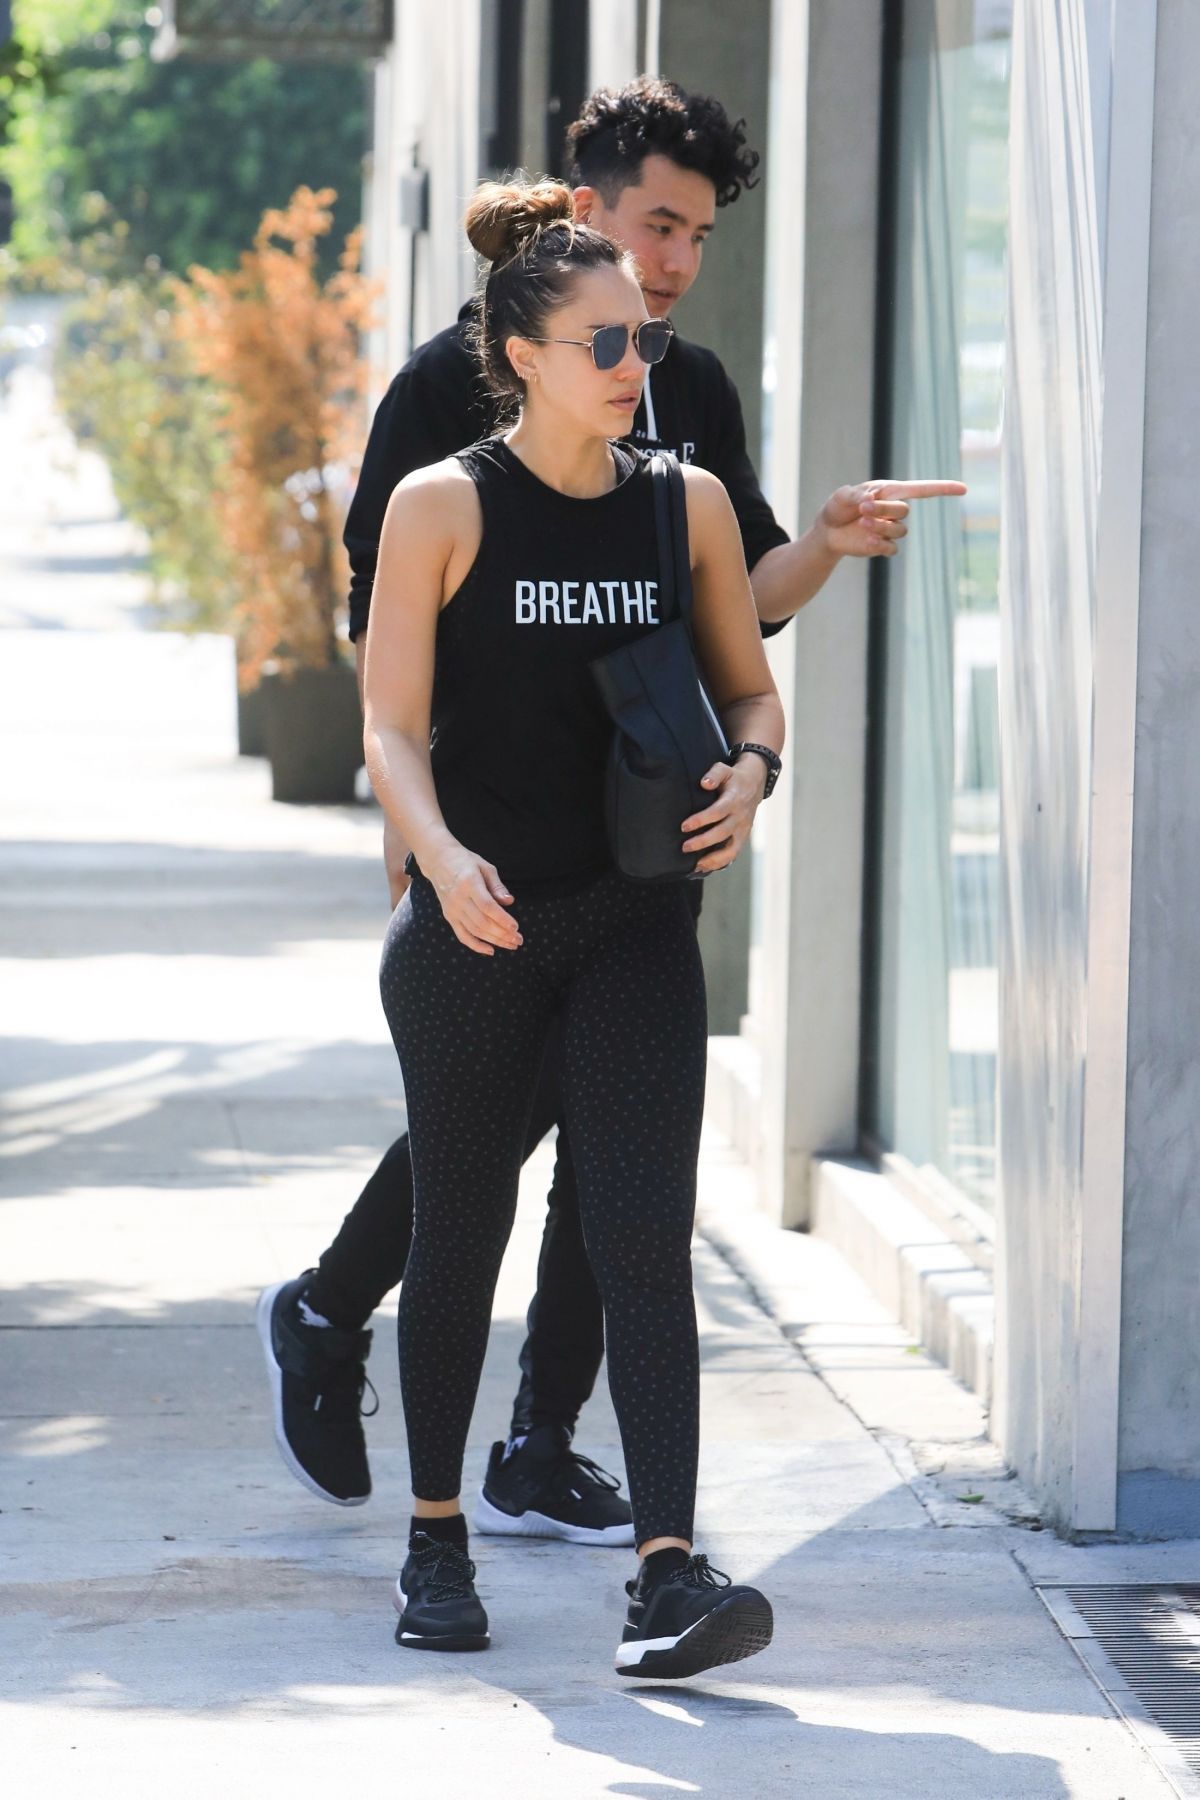 JESSICA ALBA Leaves a Gym in West Hollywood 10/22/2018 